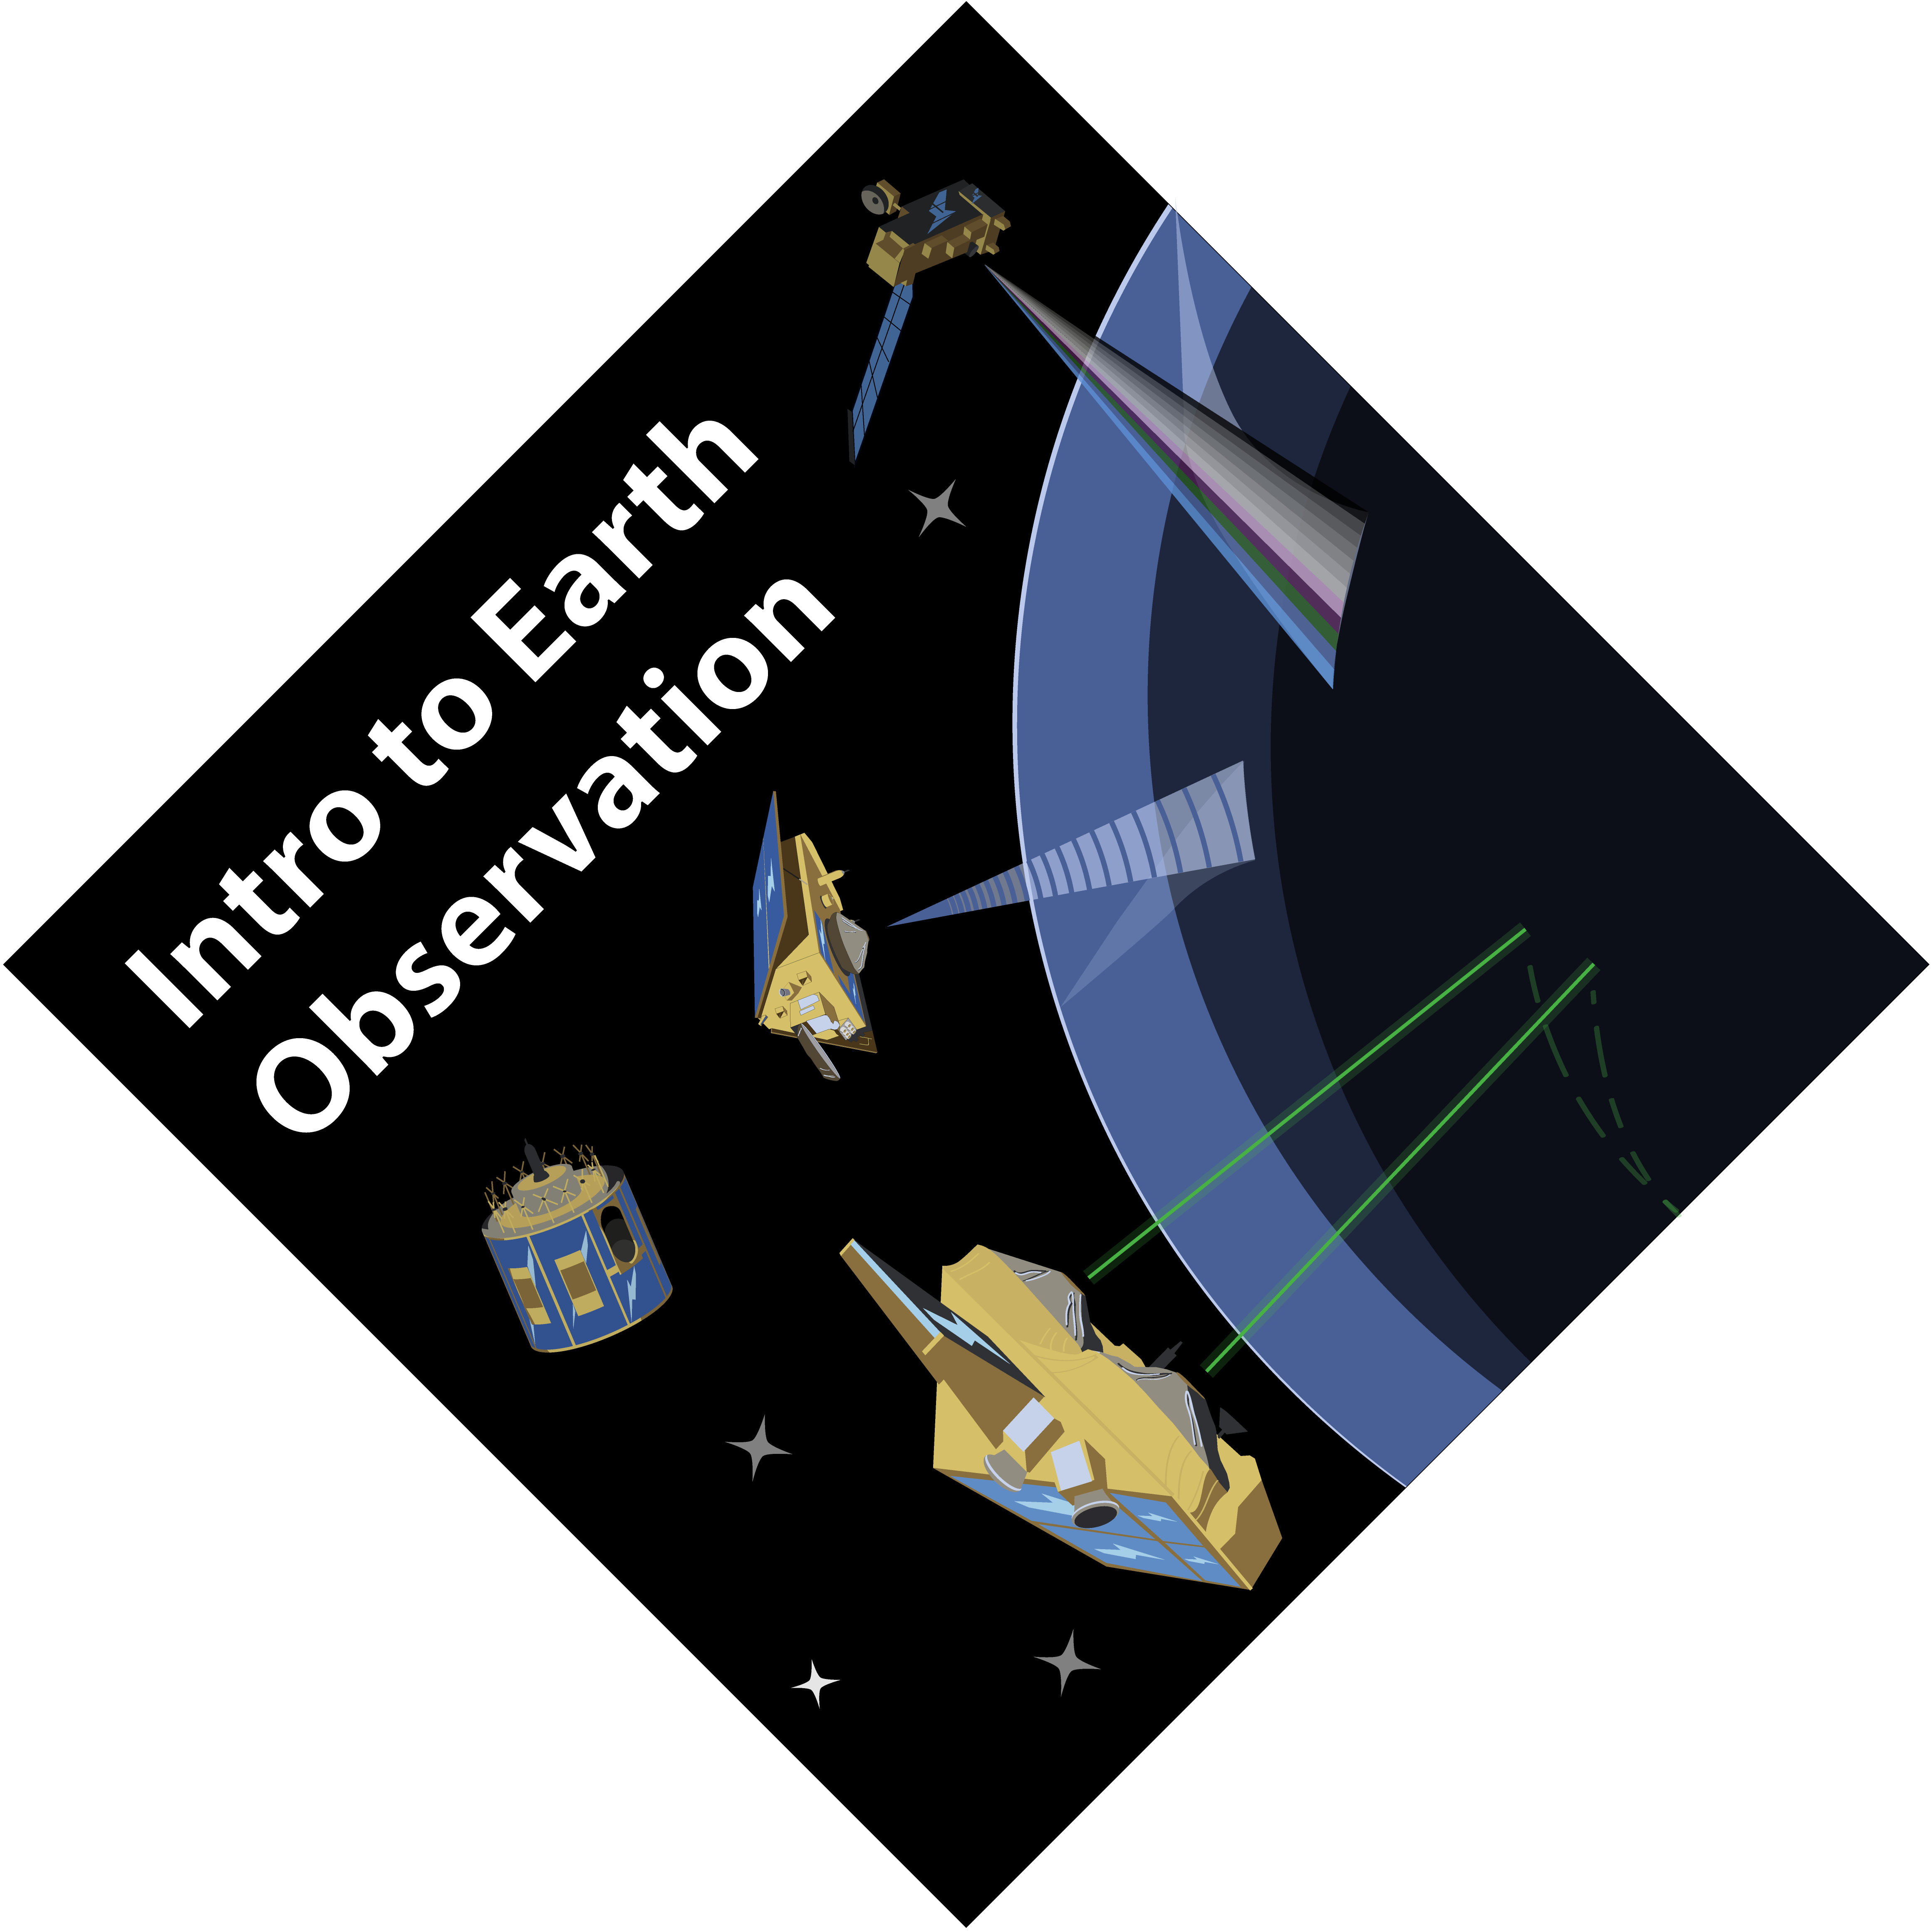 Intro to Earth Observation logo